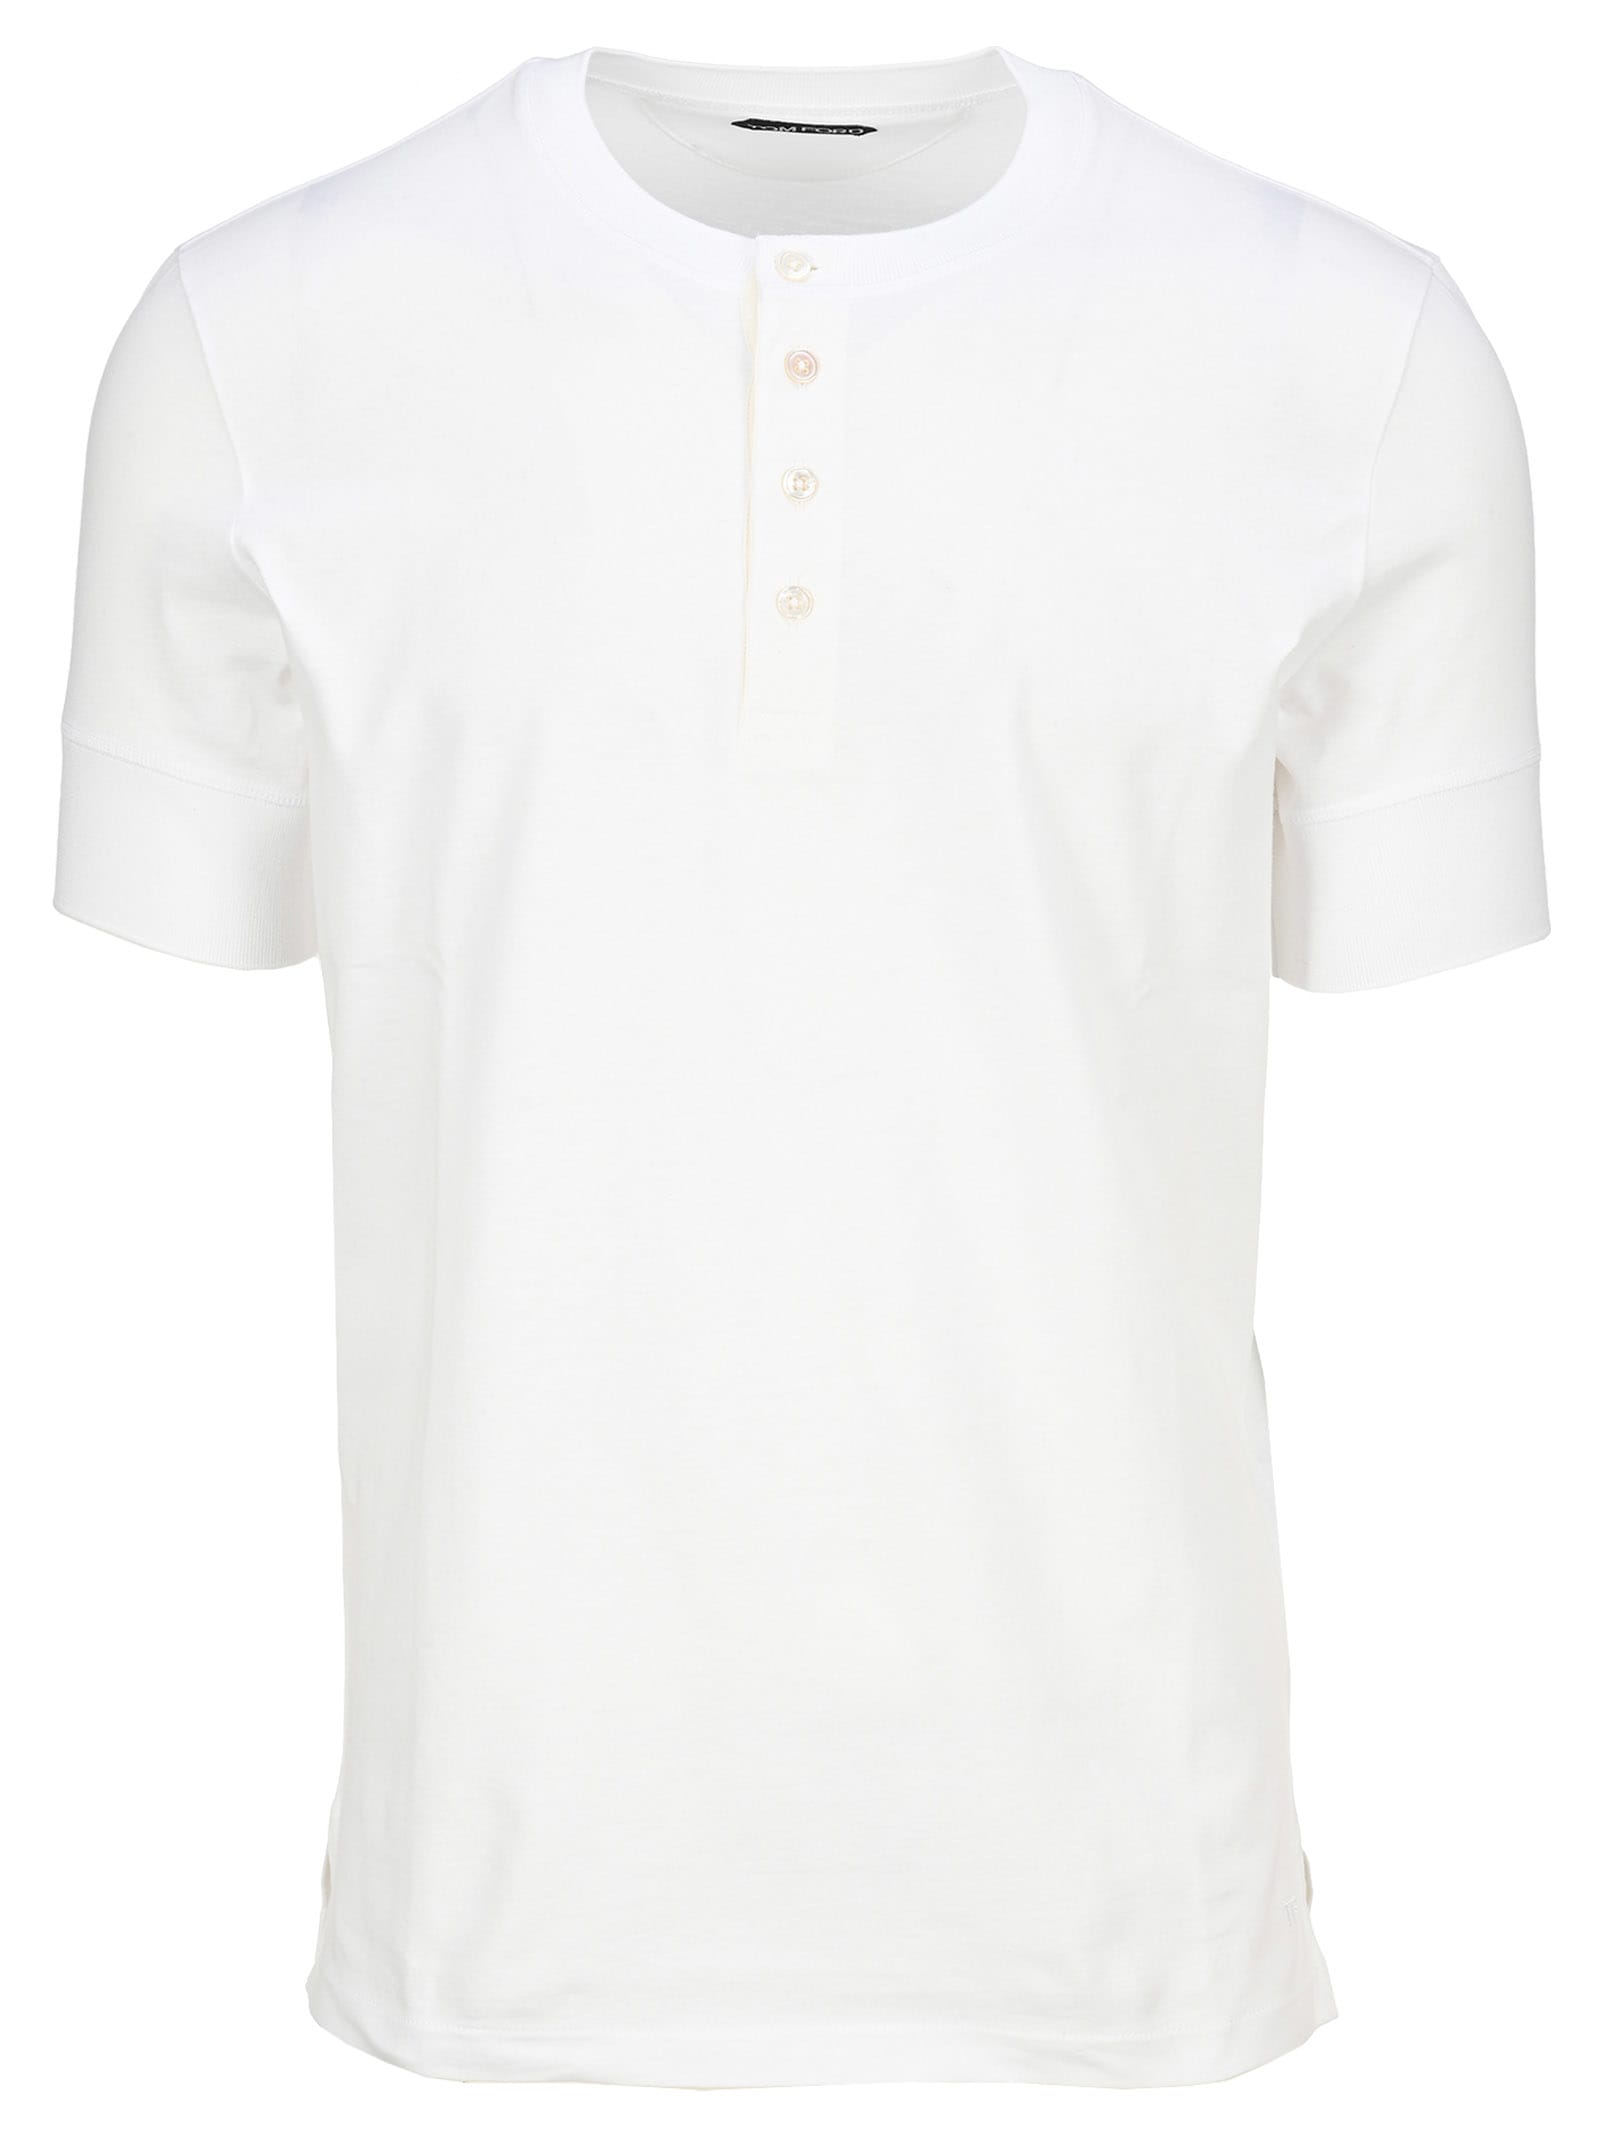 Tom Ford Button Up T-shirt